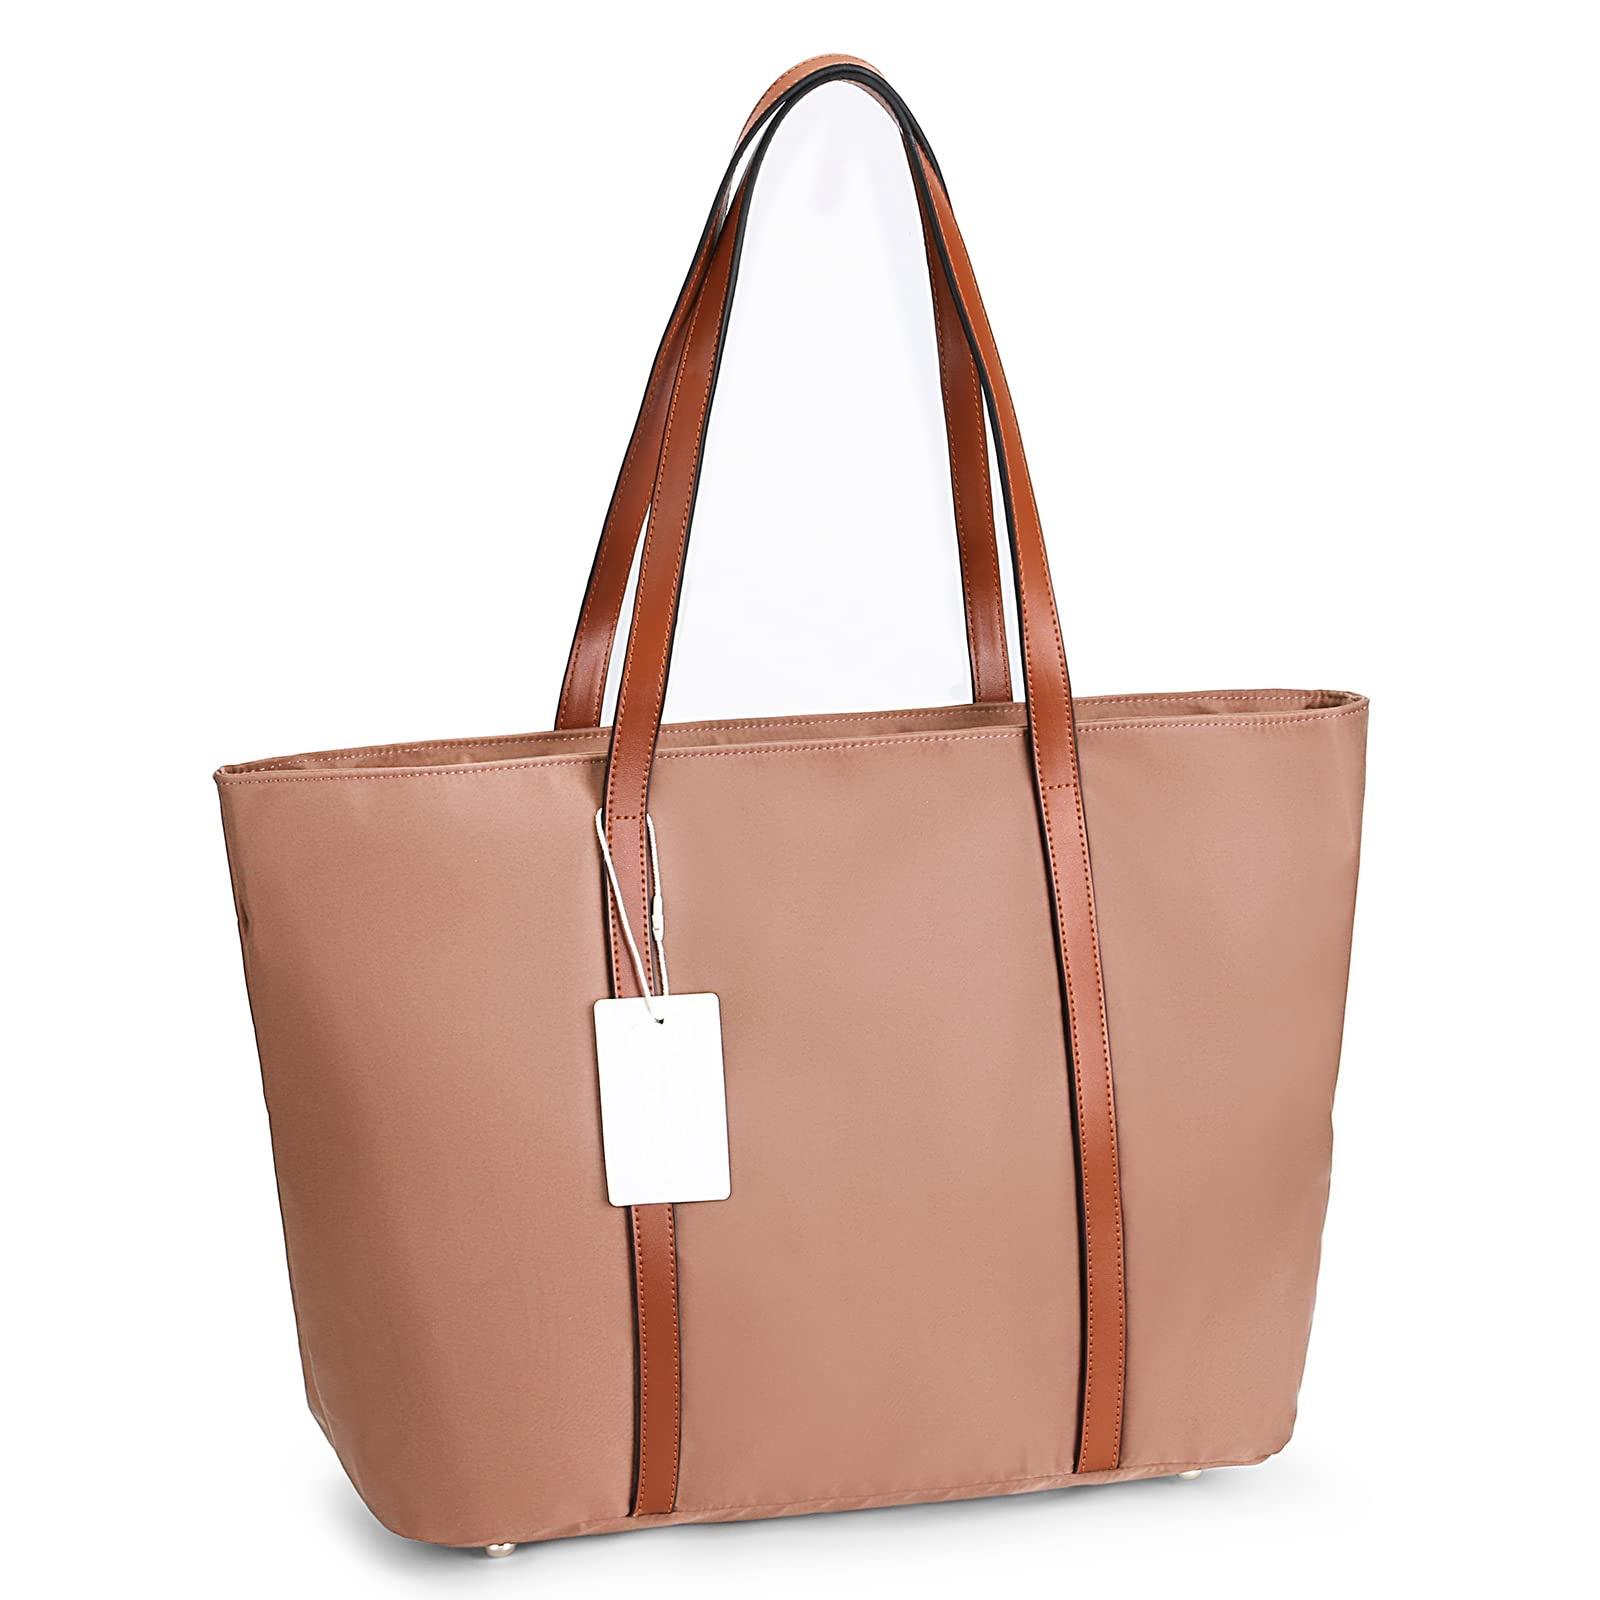 15.6 inch Women's Tote Bag Women's Oxford Large Capacity Work fit Women Leather Nylon Shoulder Bag